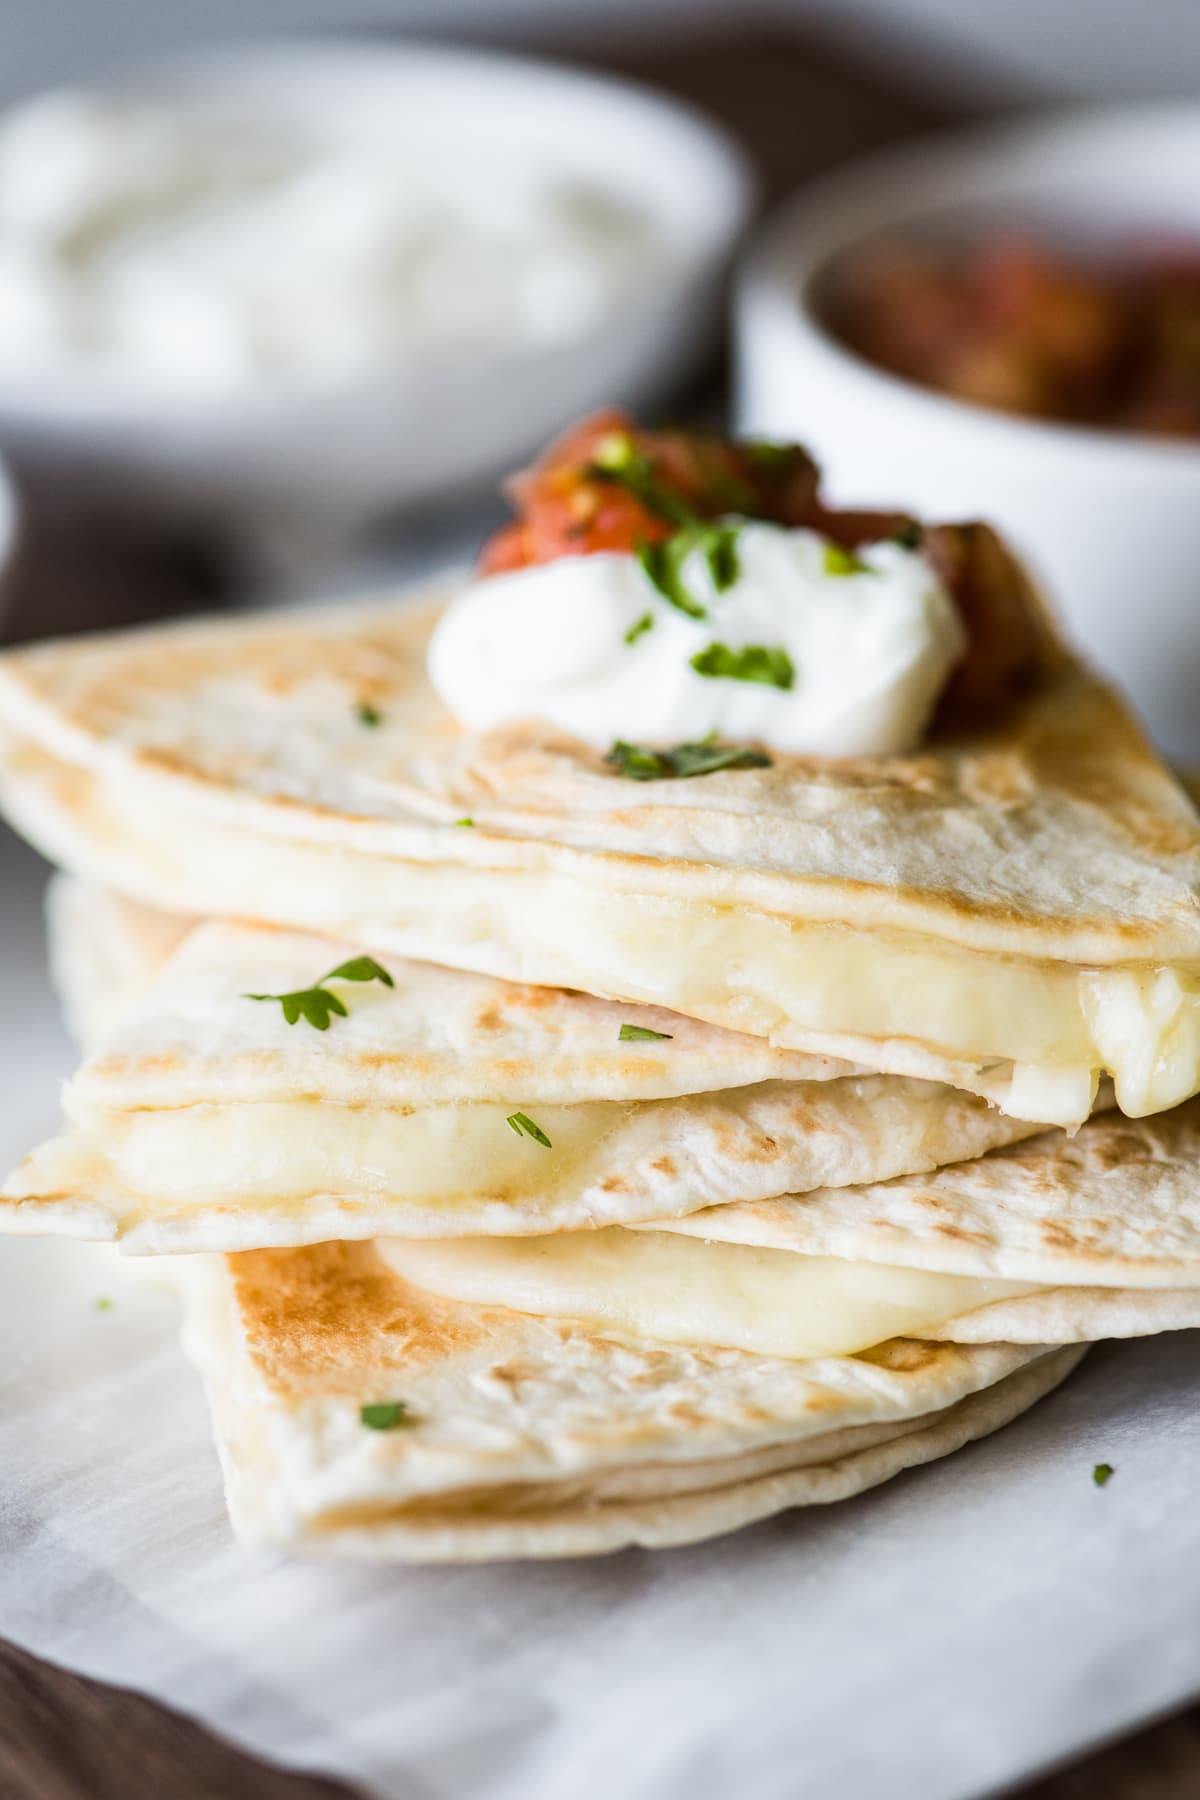 A cheese quesadilla with melted cheese oozing out of the tortilla.